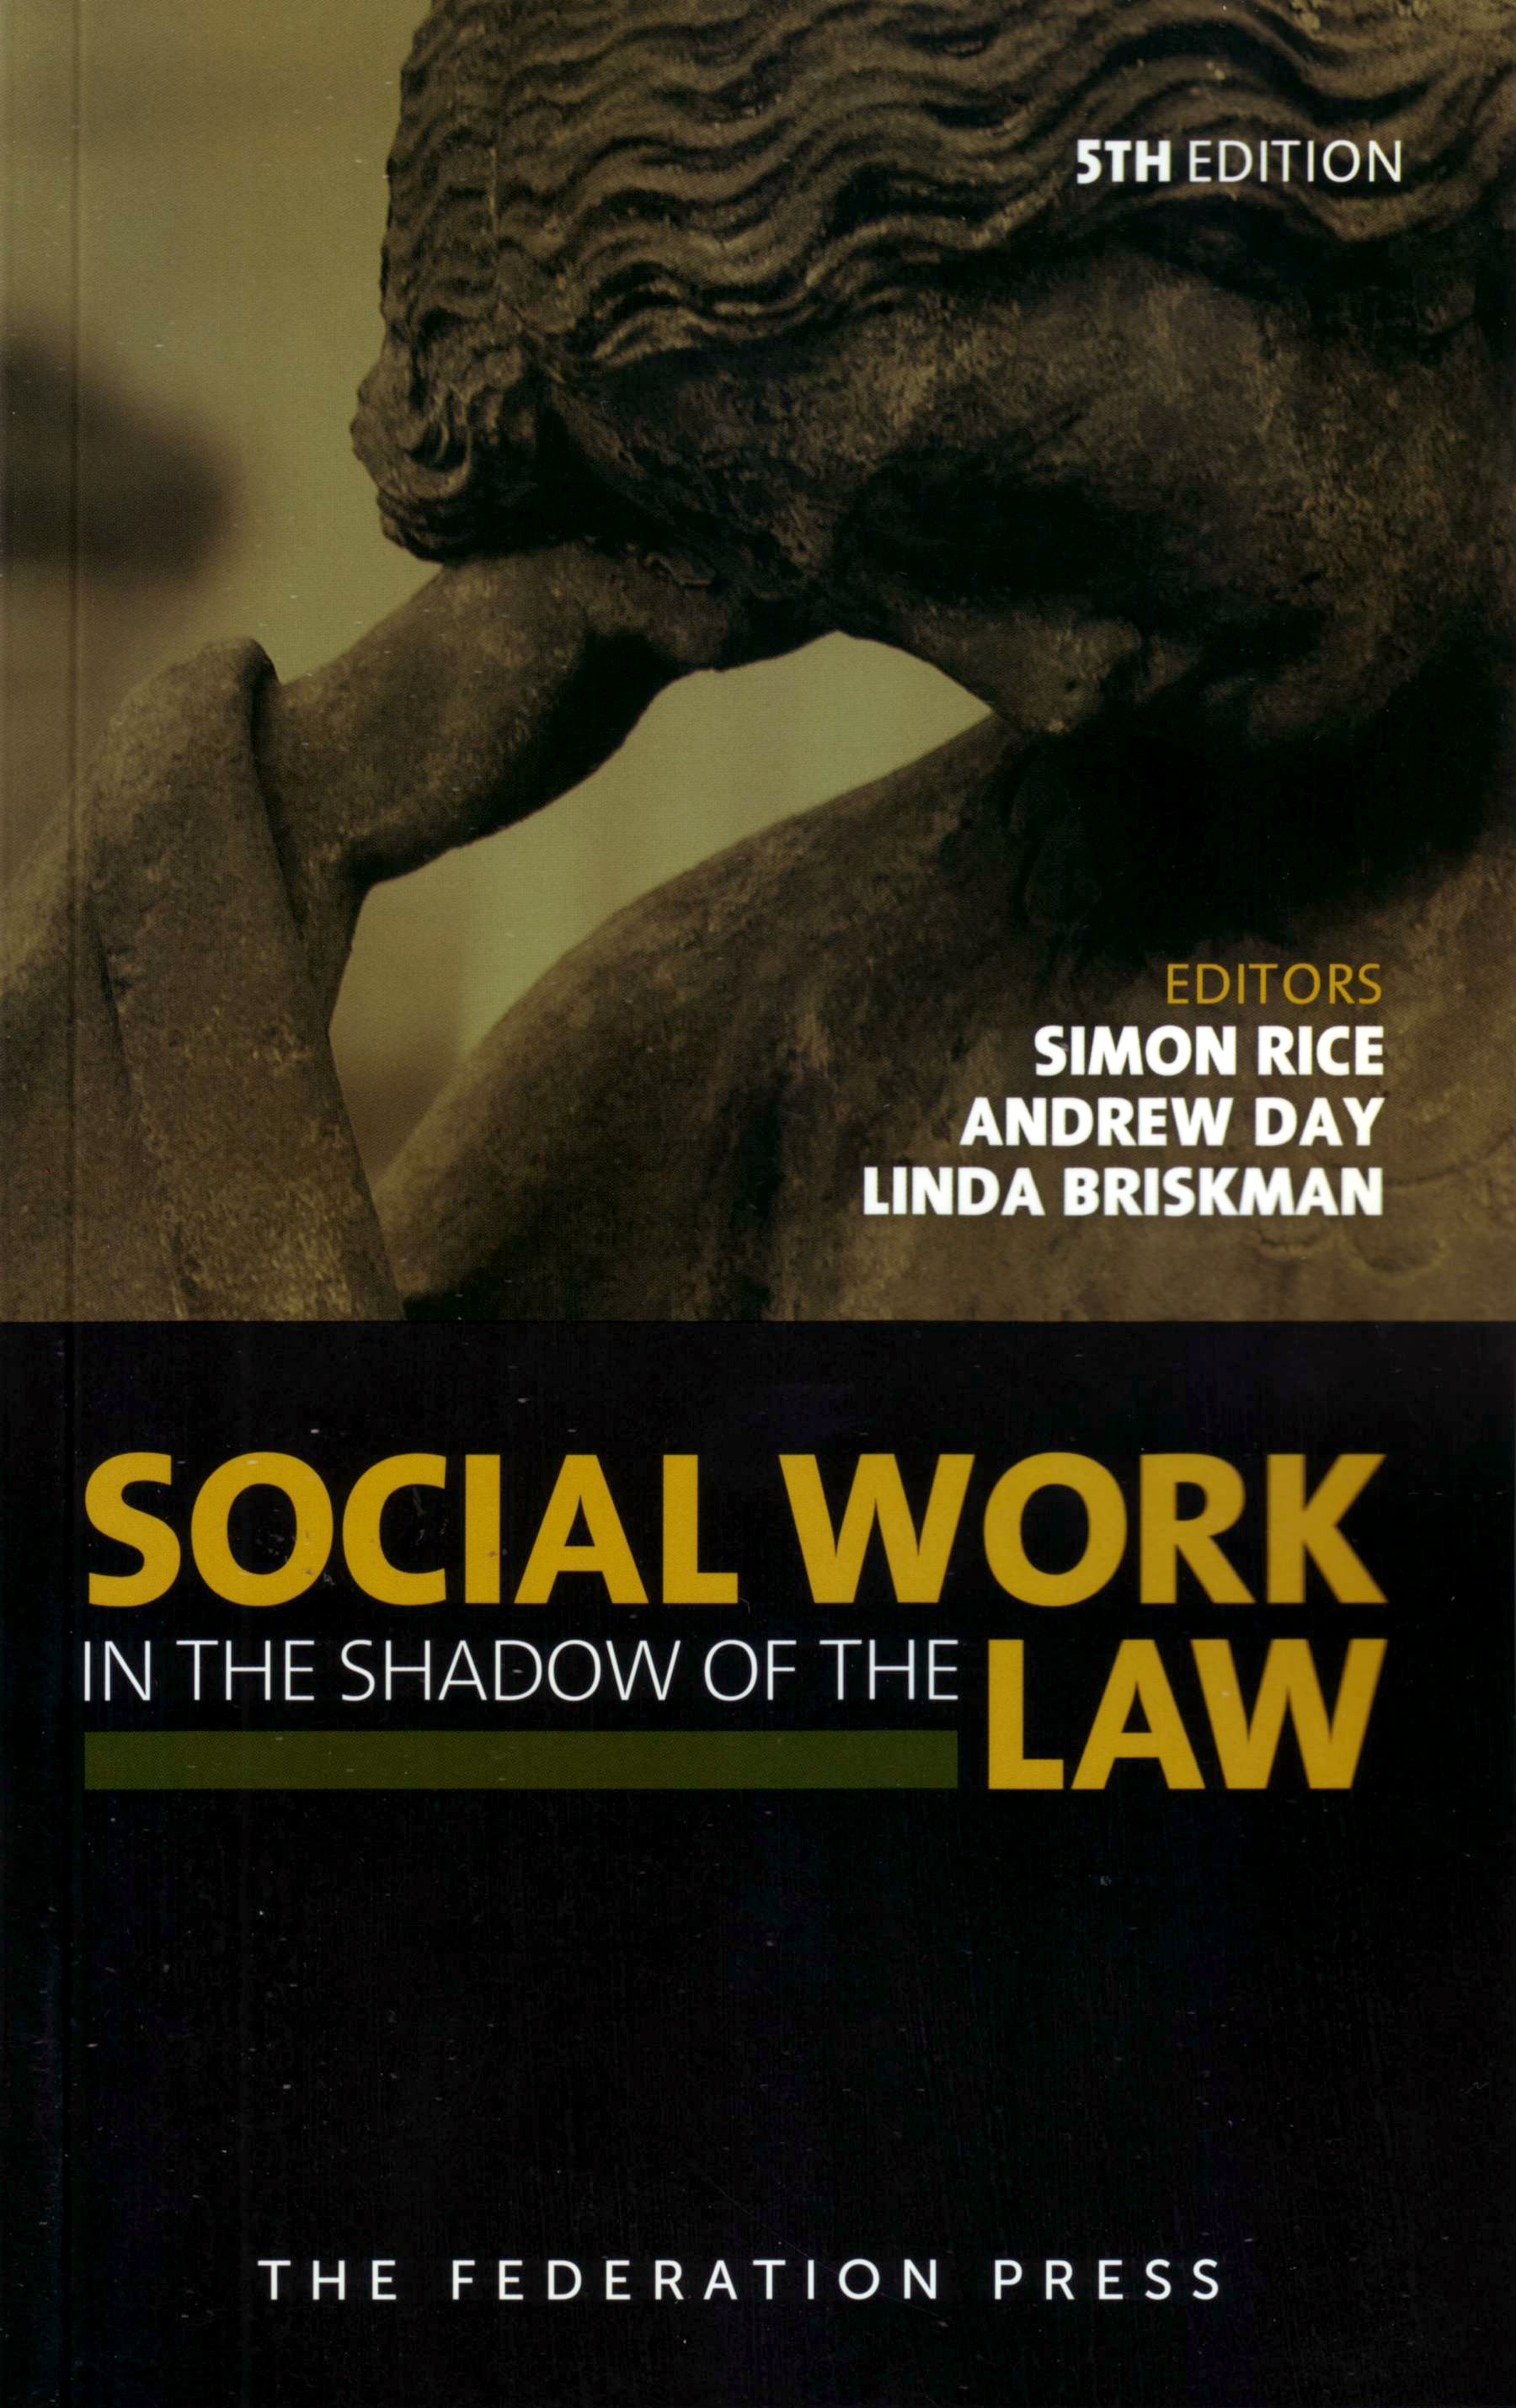 Social Work in the Shadow of the Law e5